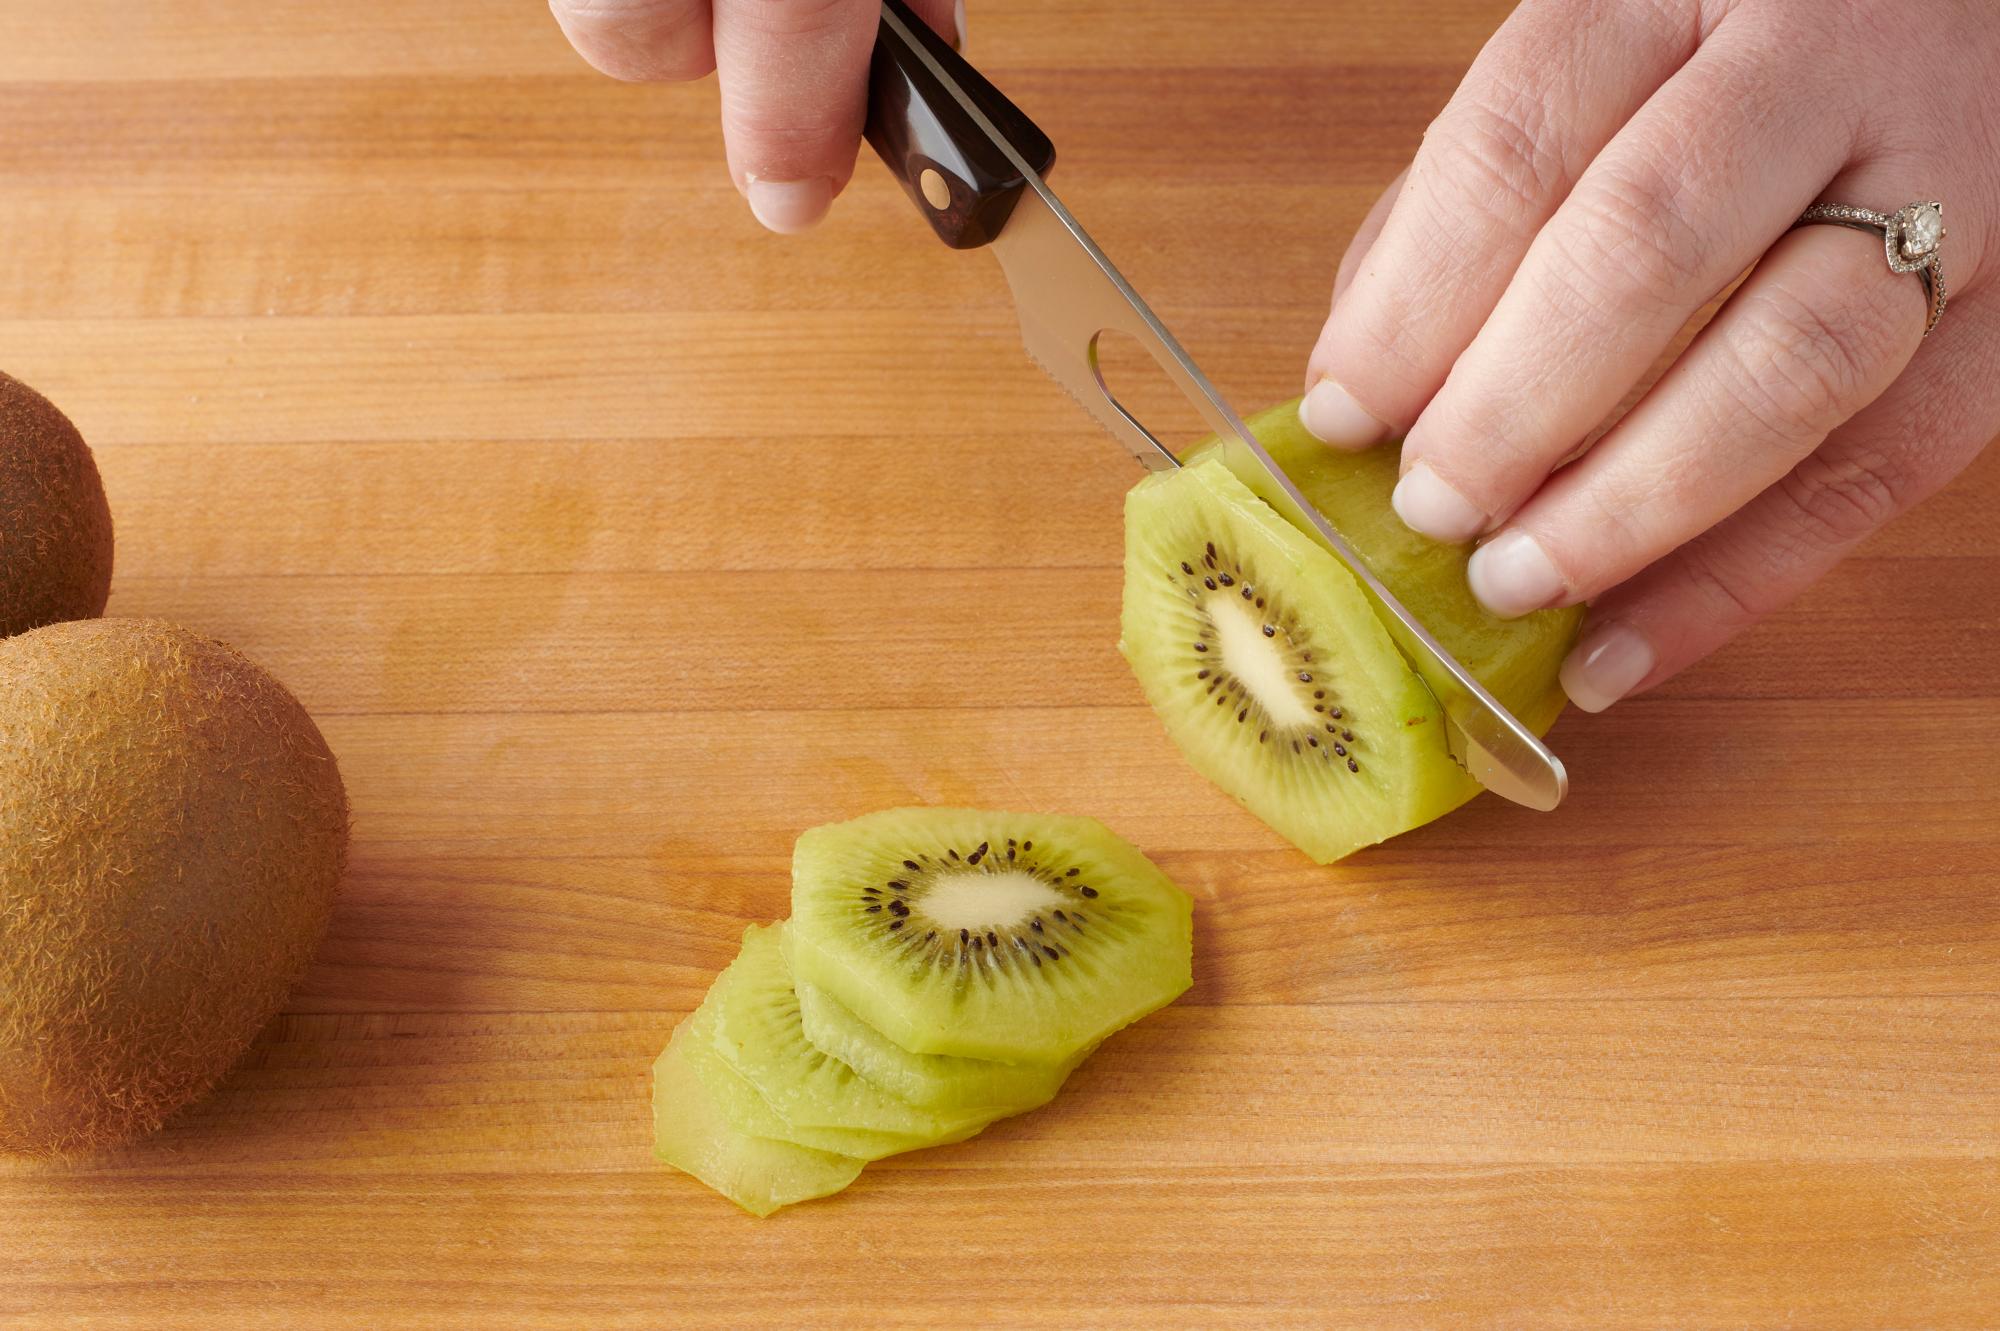 Slicing the kiwi with a Mini Cheese Knife.